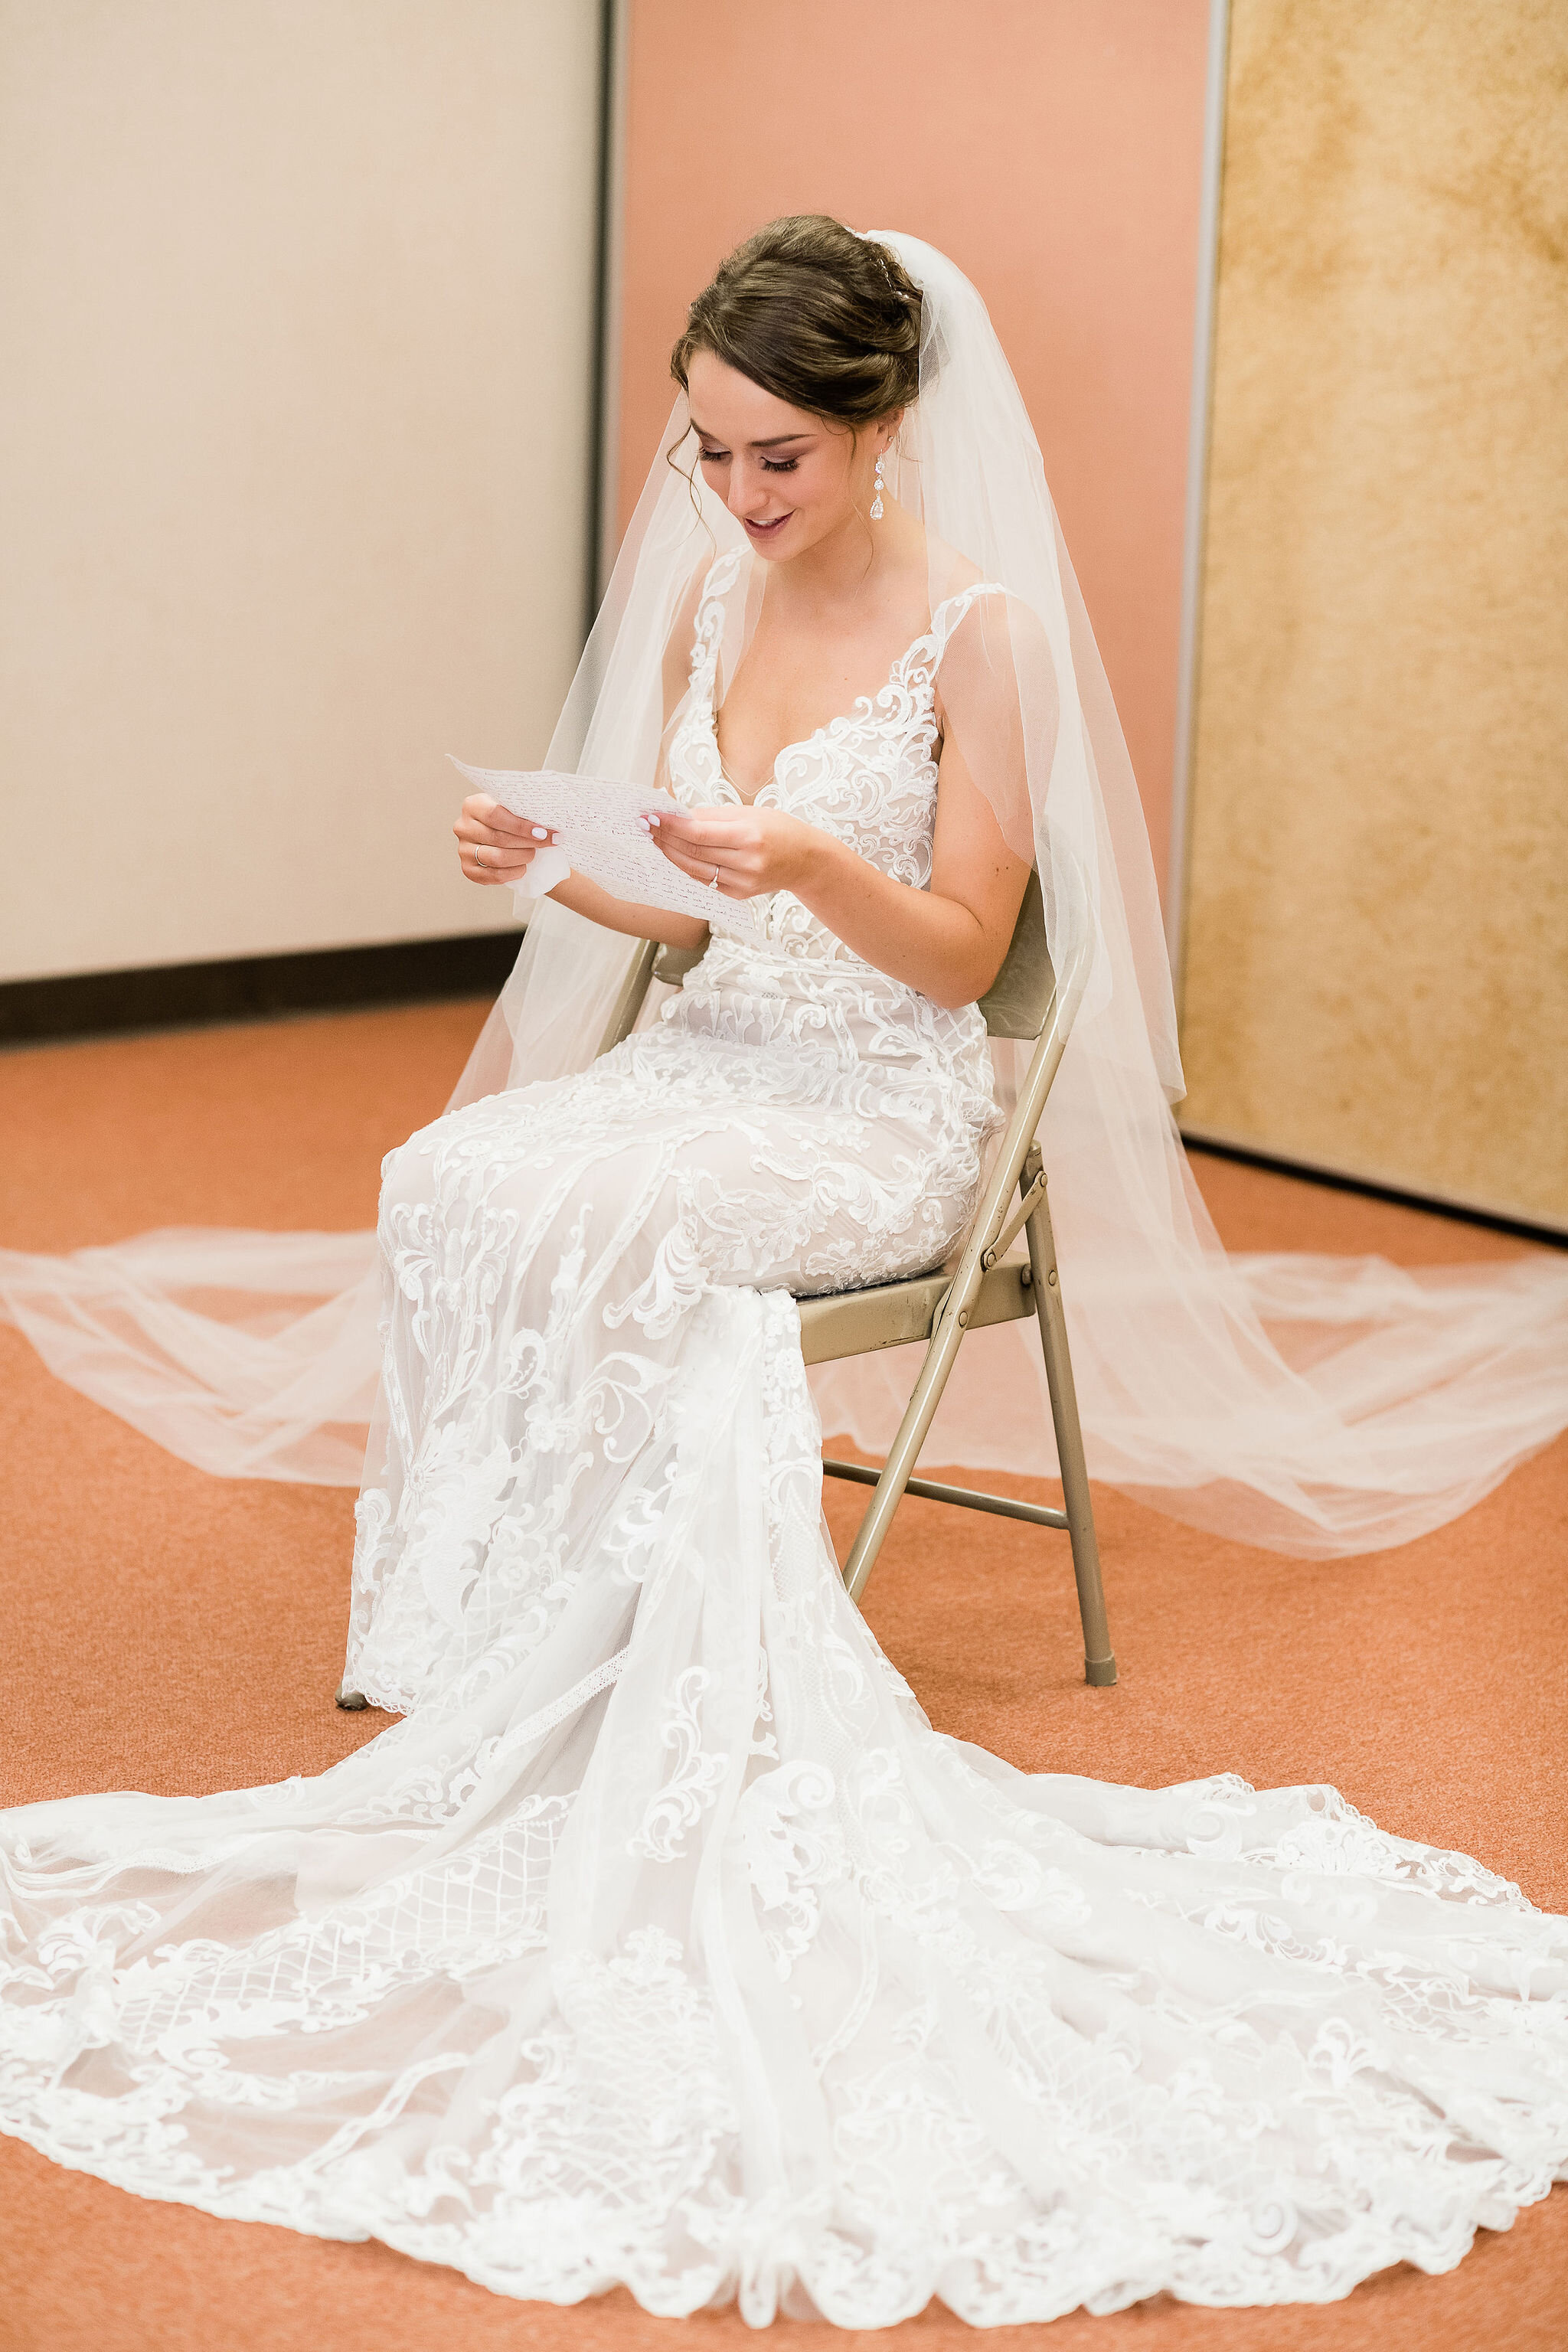 Bride reading a letter from her husband to be